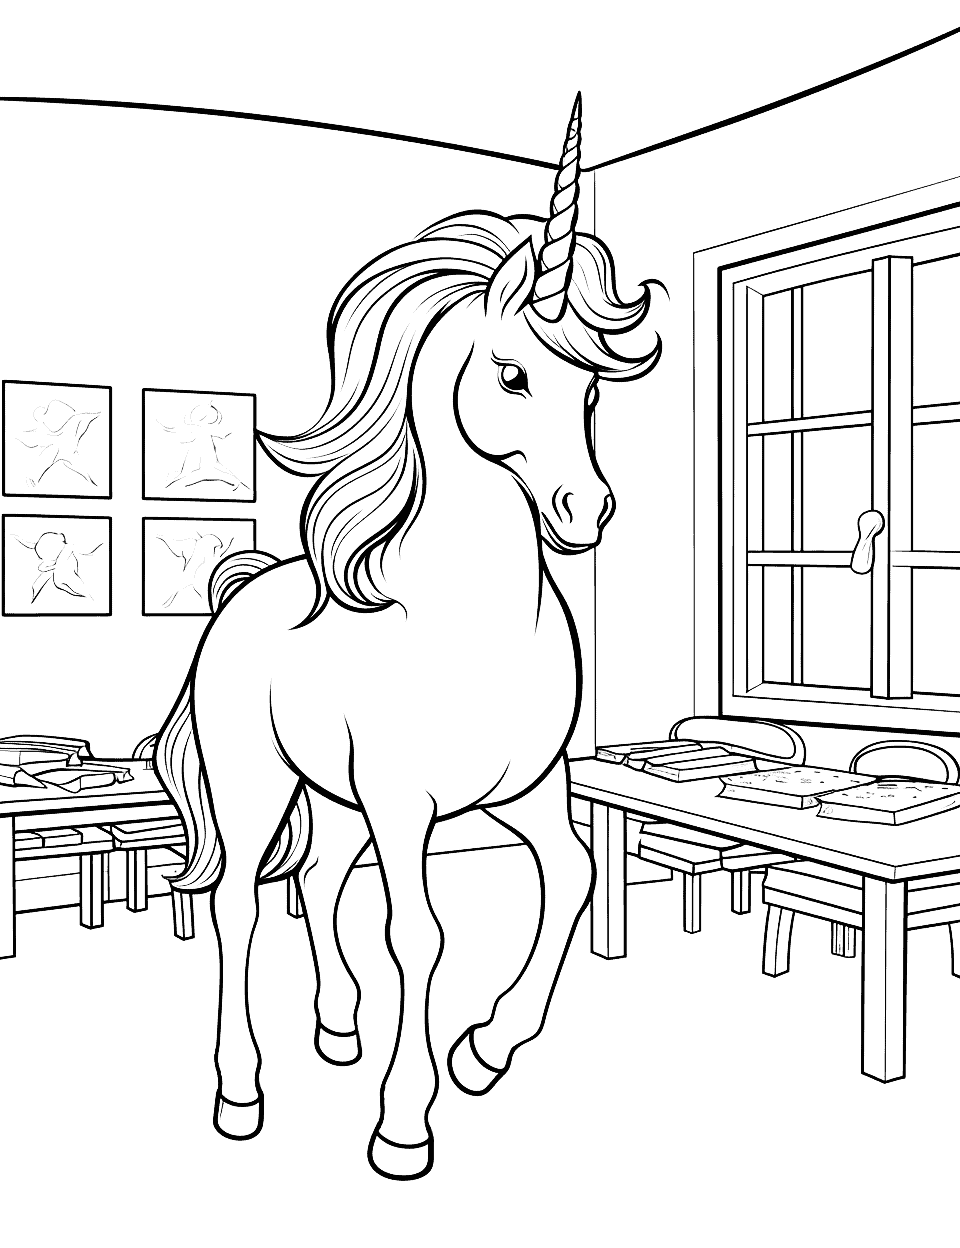 Unicorn at the School Coloring Page - A studious unicorn at school, in the classroom, learning magical spells.